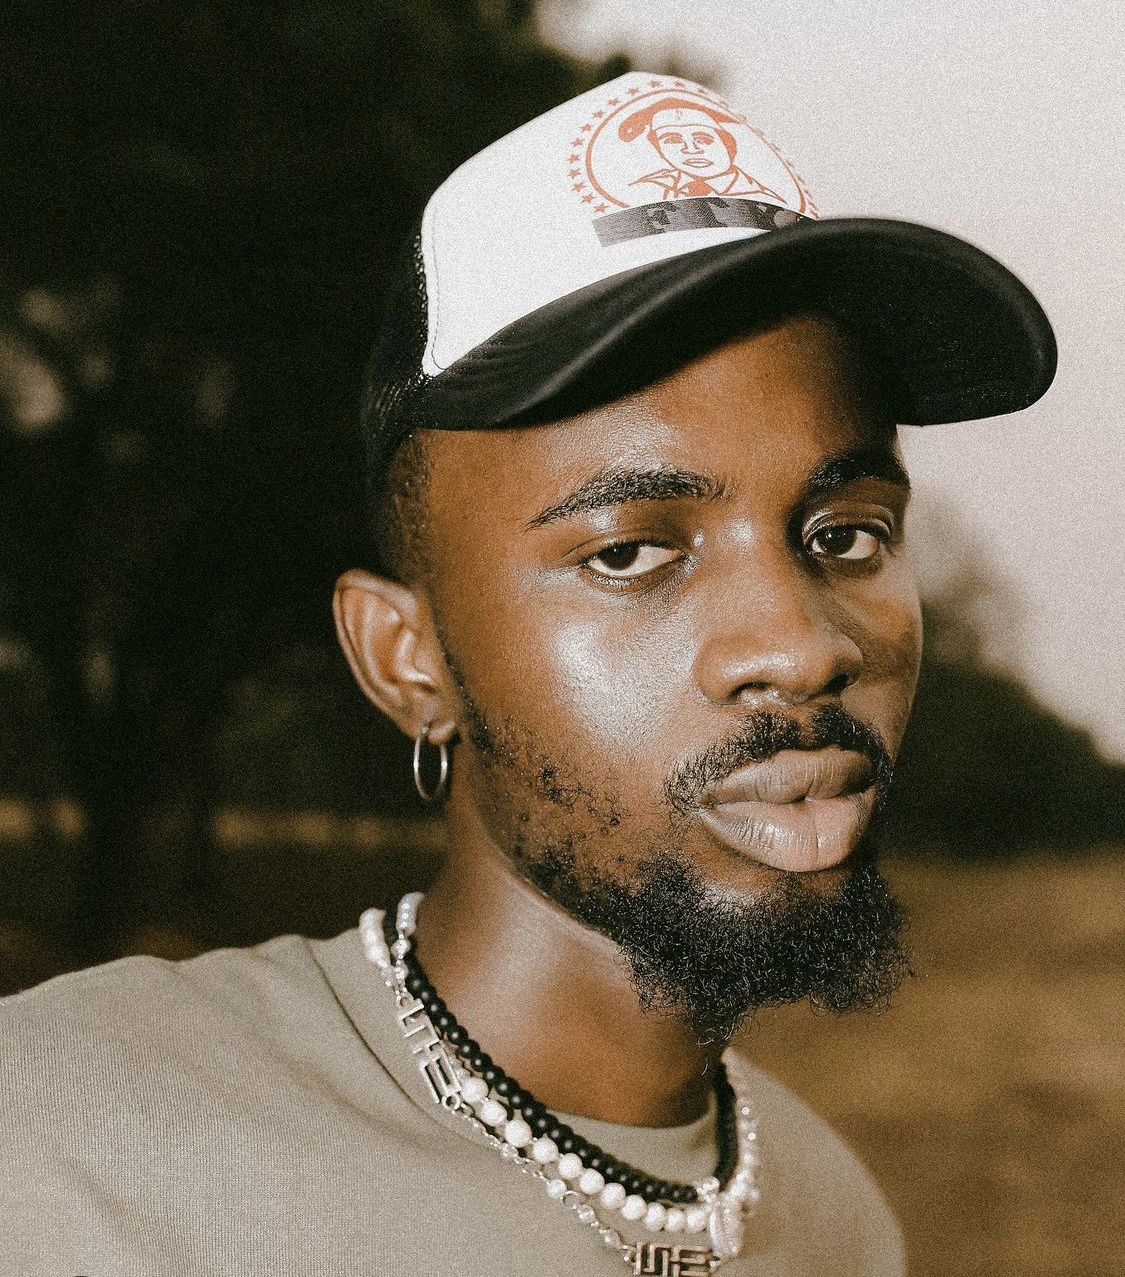 Black Sherif Biography, Real Name, Age, Songs, Net Worth 9ja Daily